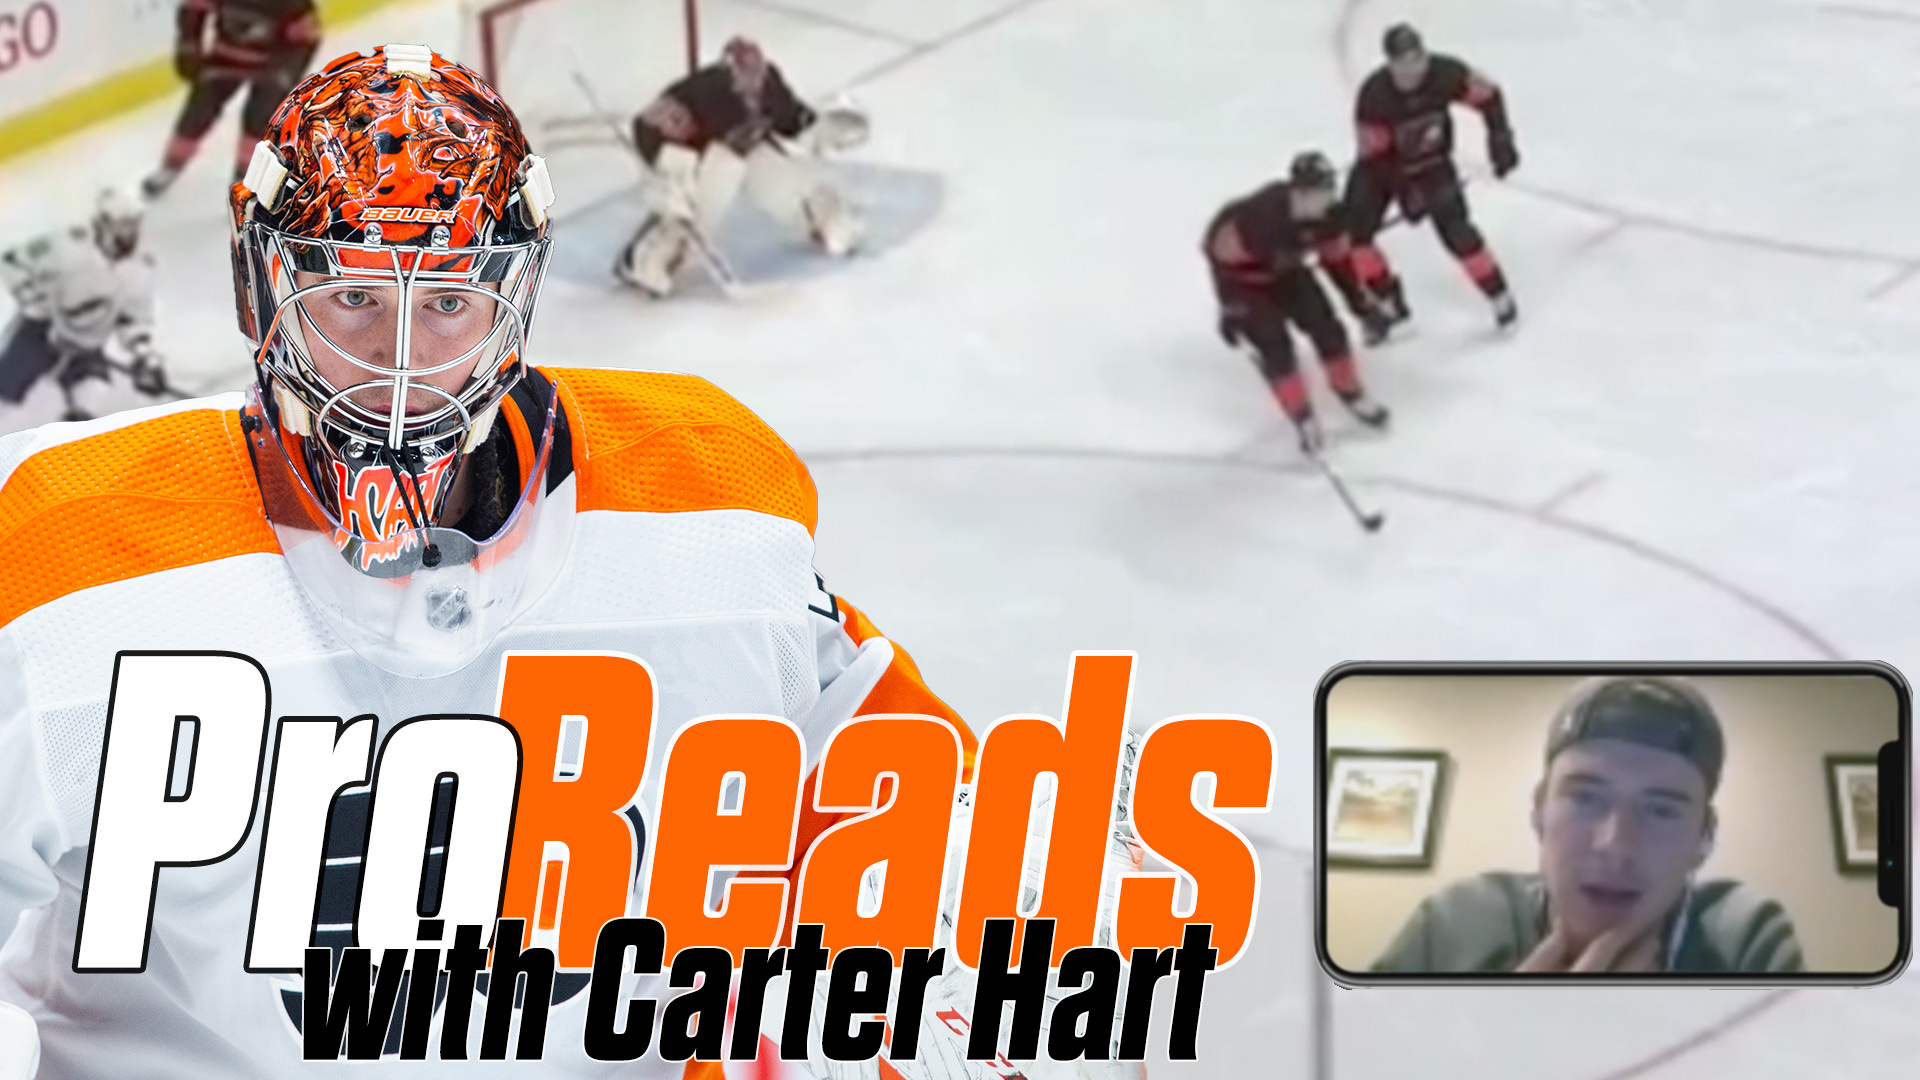 Carter Hart: Low to high broken play leads to point shot and short side rebound